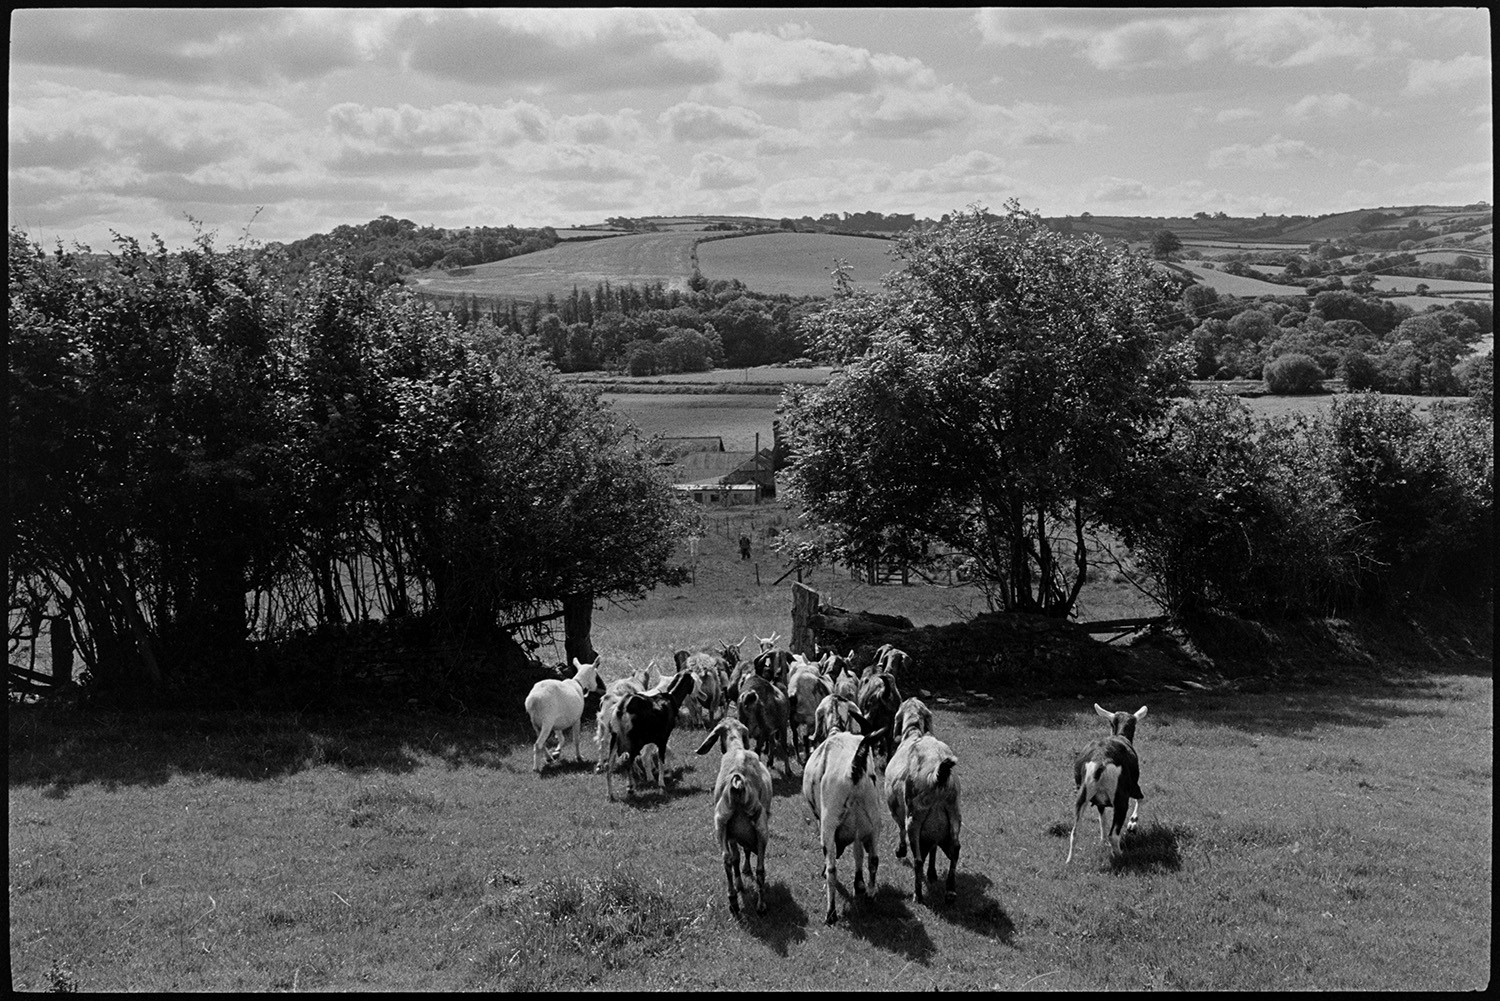 Cows and goats in fields of cheesemakers. 
[A herd of goats walking through an open field gateway towards the farm buildings at Park Farm, Umberleigh, possibly to be milked.  A landscape of fields, trees and hedgerows can be seen in the background. The farm made cheese and was run by Peter Charnley.]